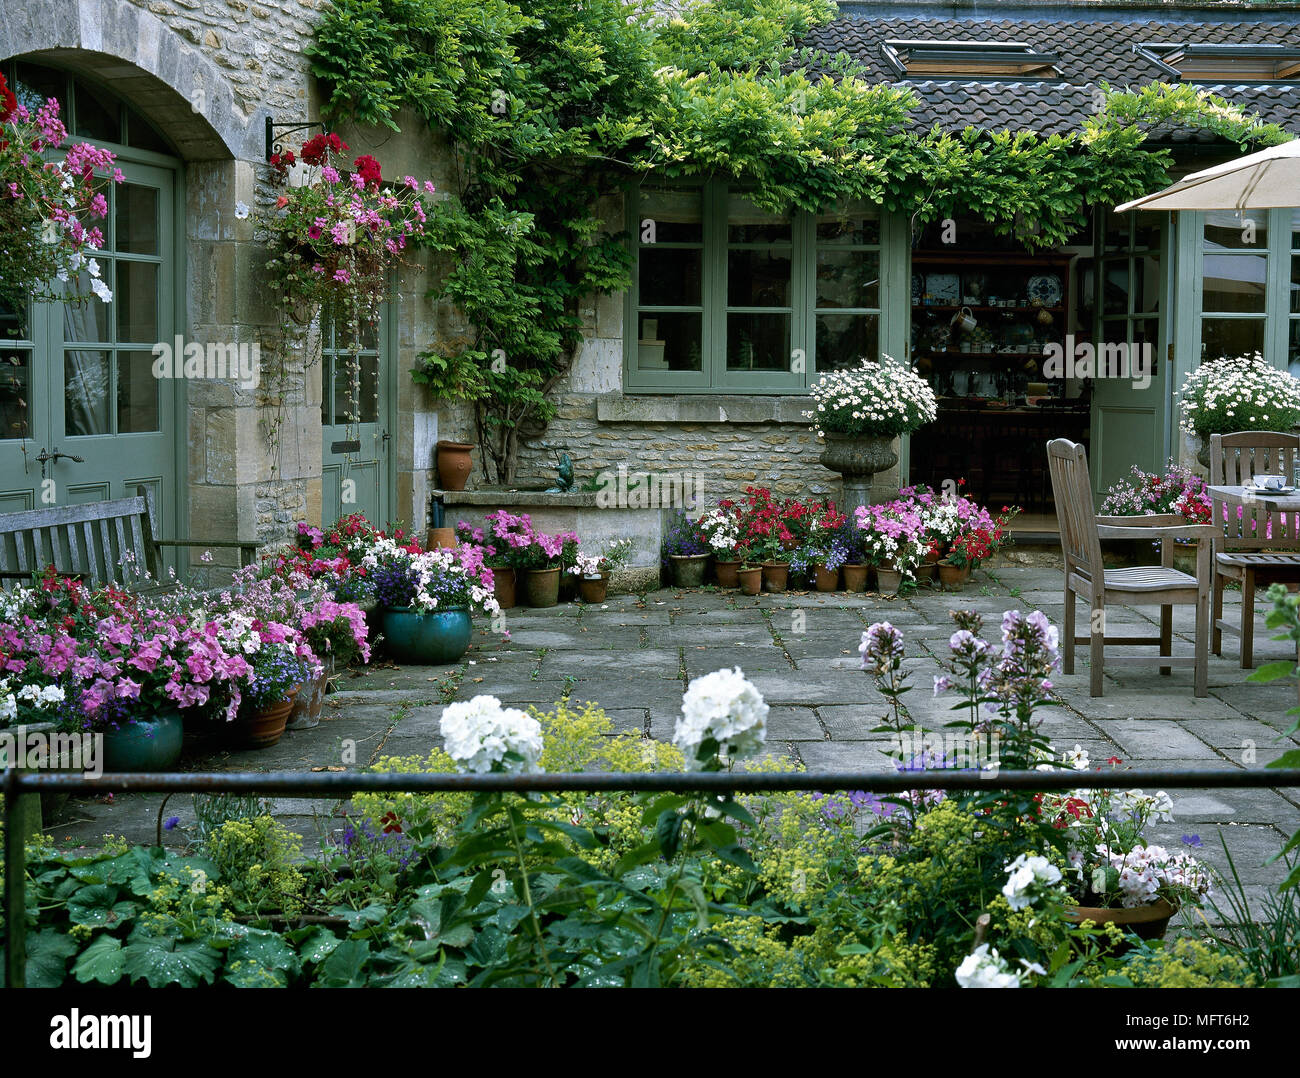 Exterior of the back terrace of a stone country house with tile floor, potted flowers, and climbing vines. Stock Photo